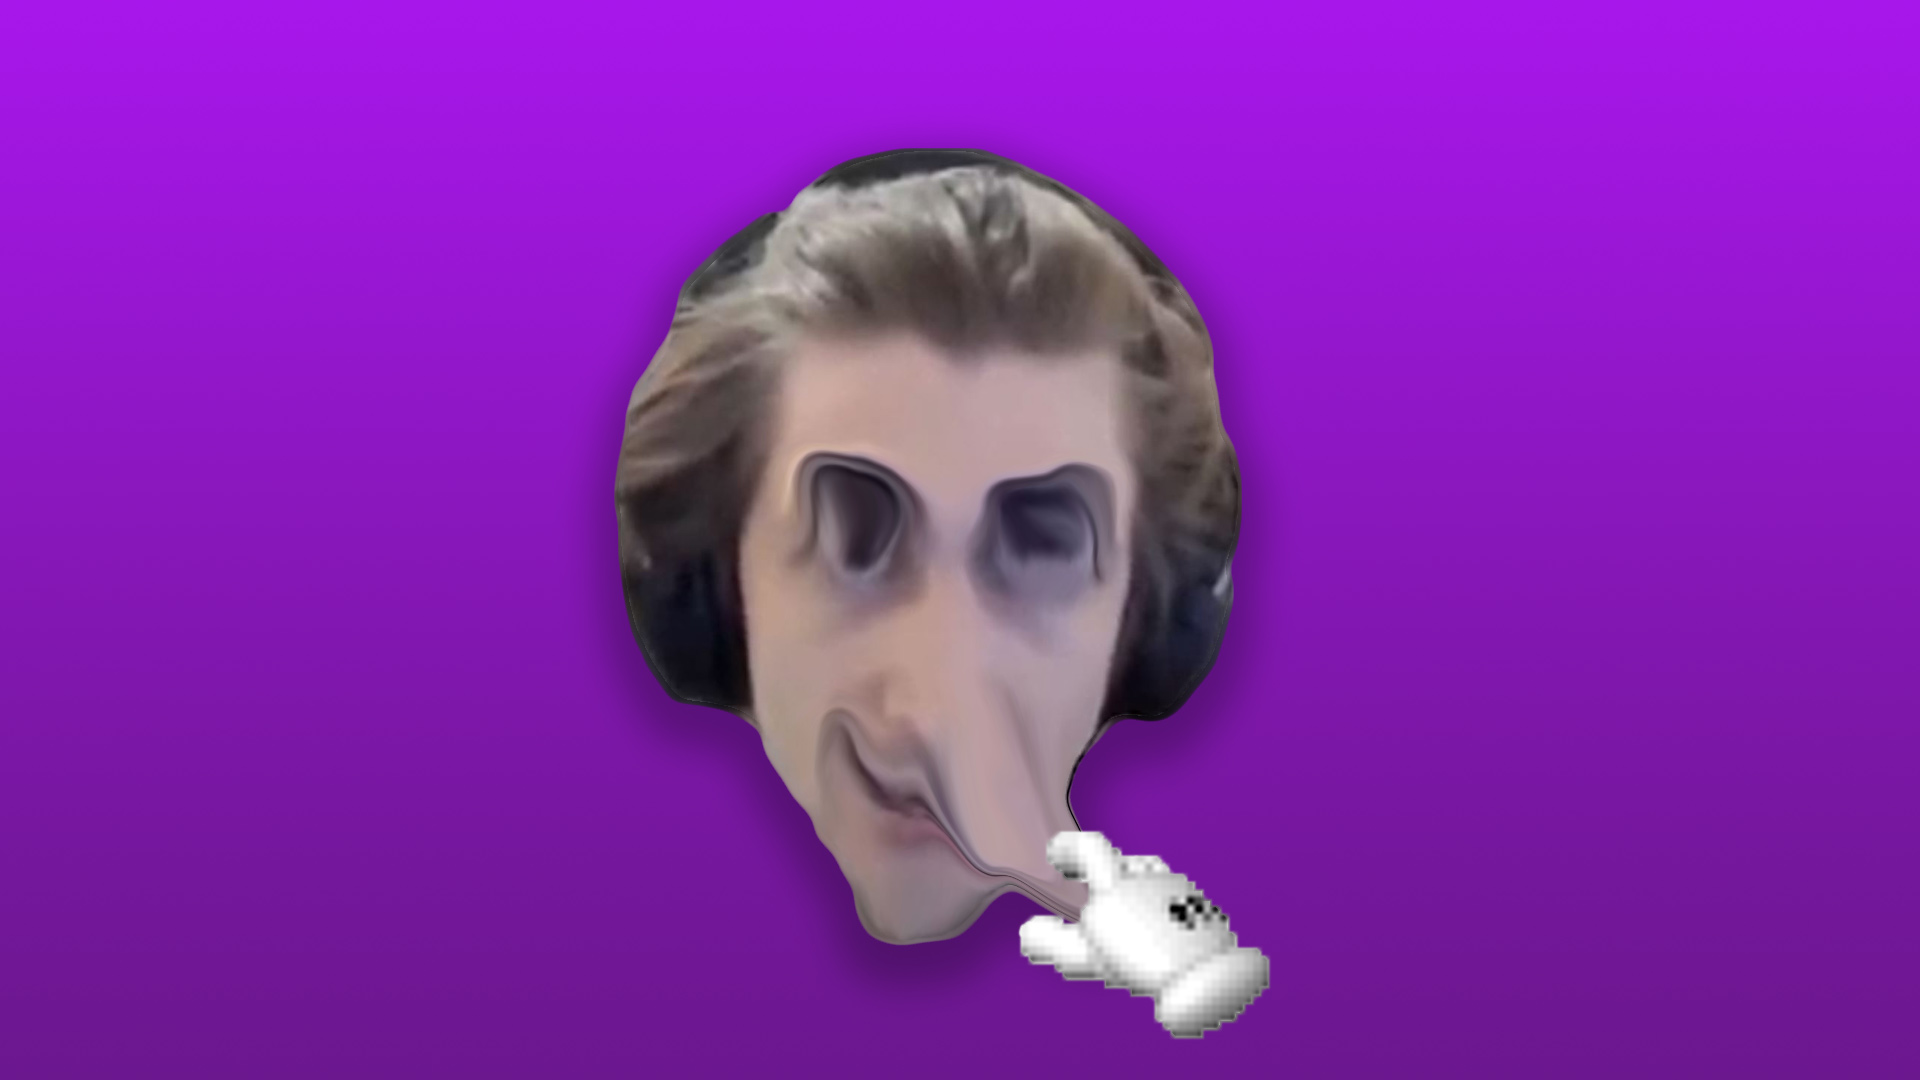 Fofamit's VTuber mask of xQc stretched out.